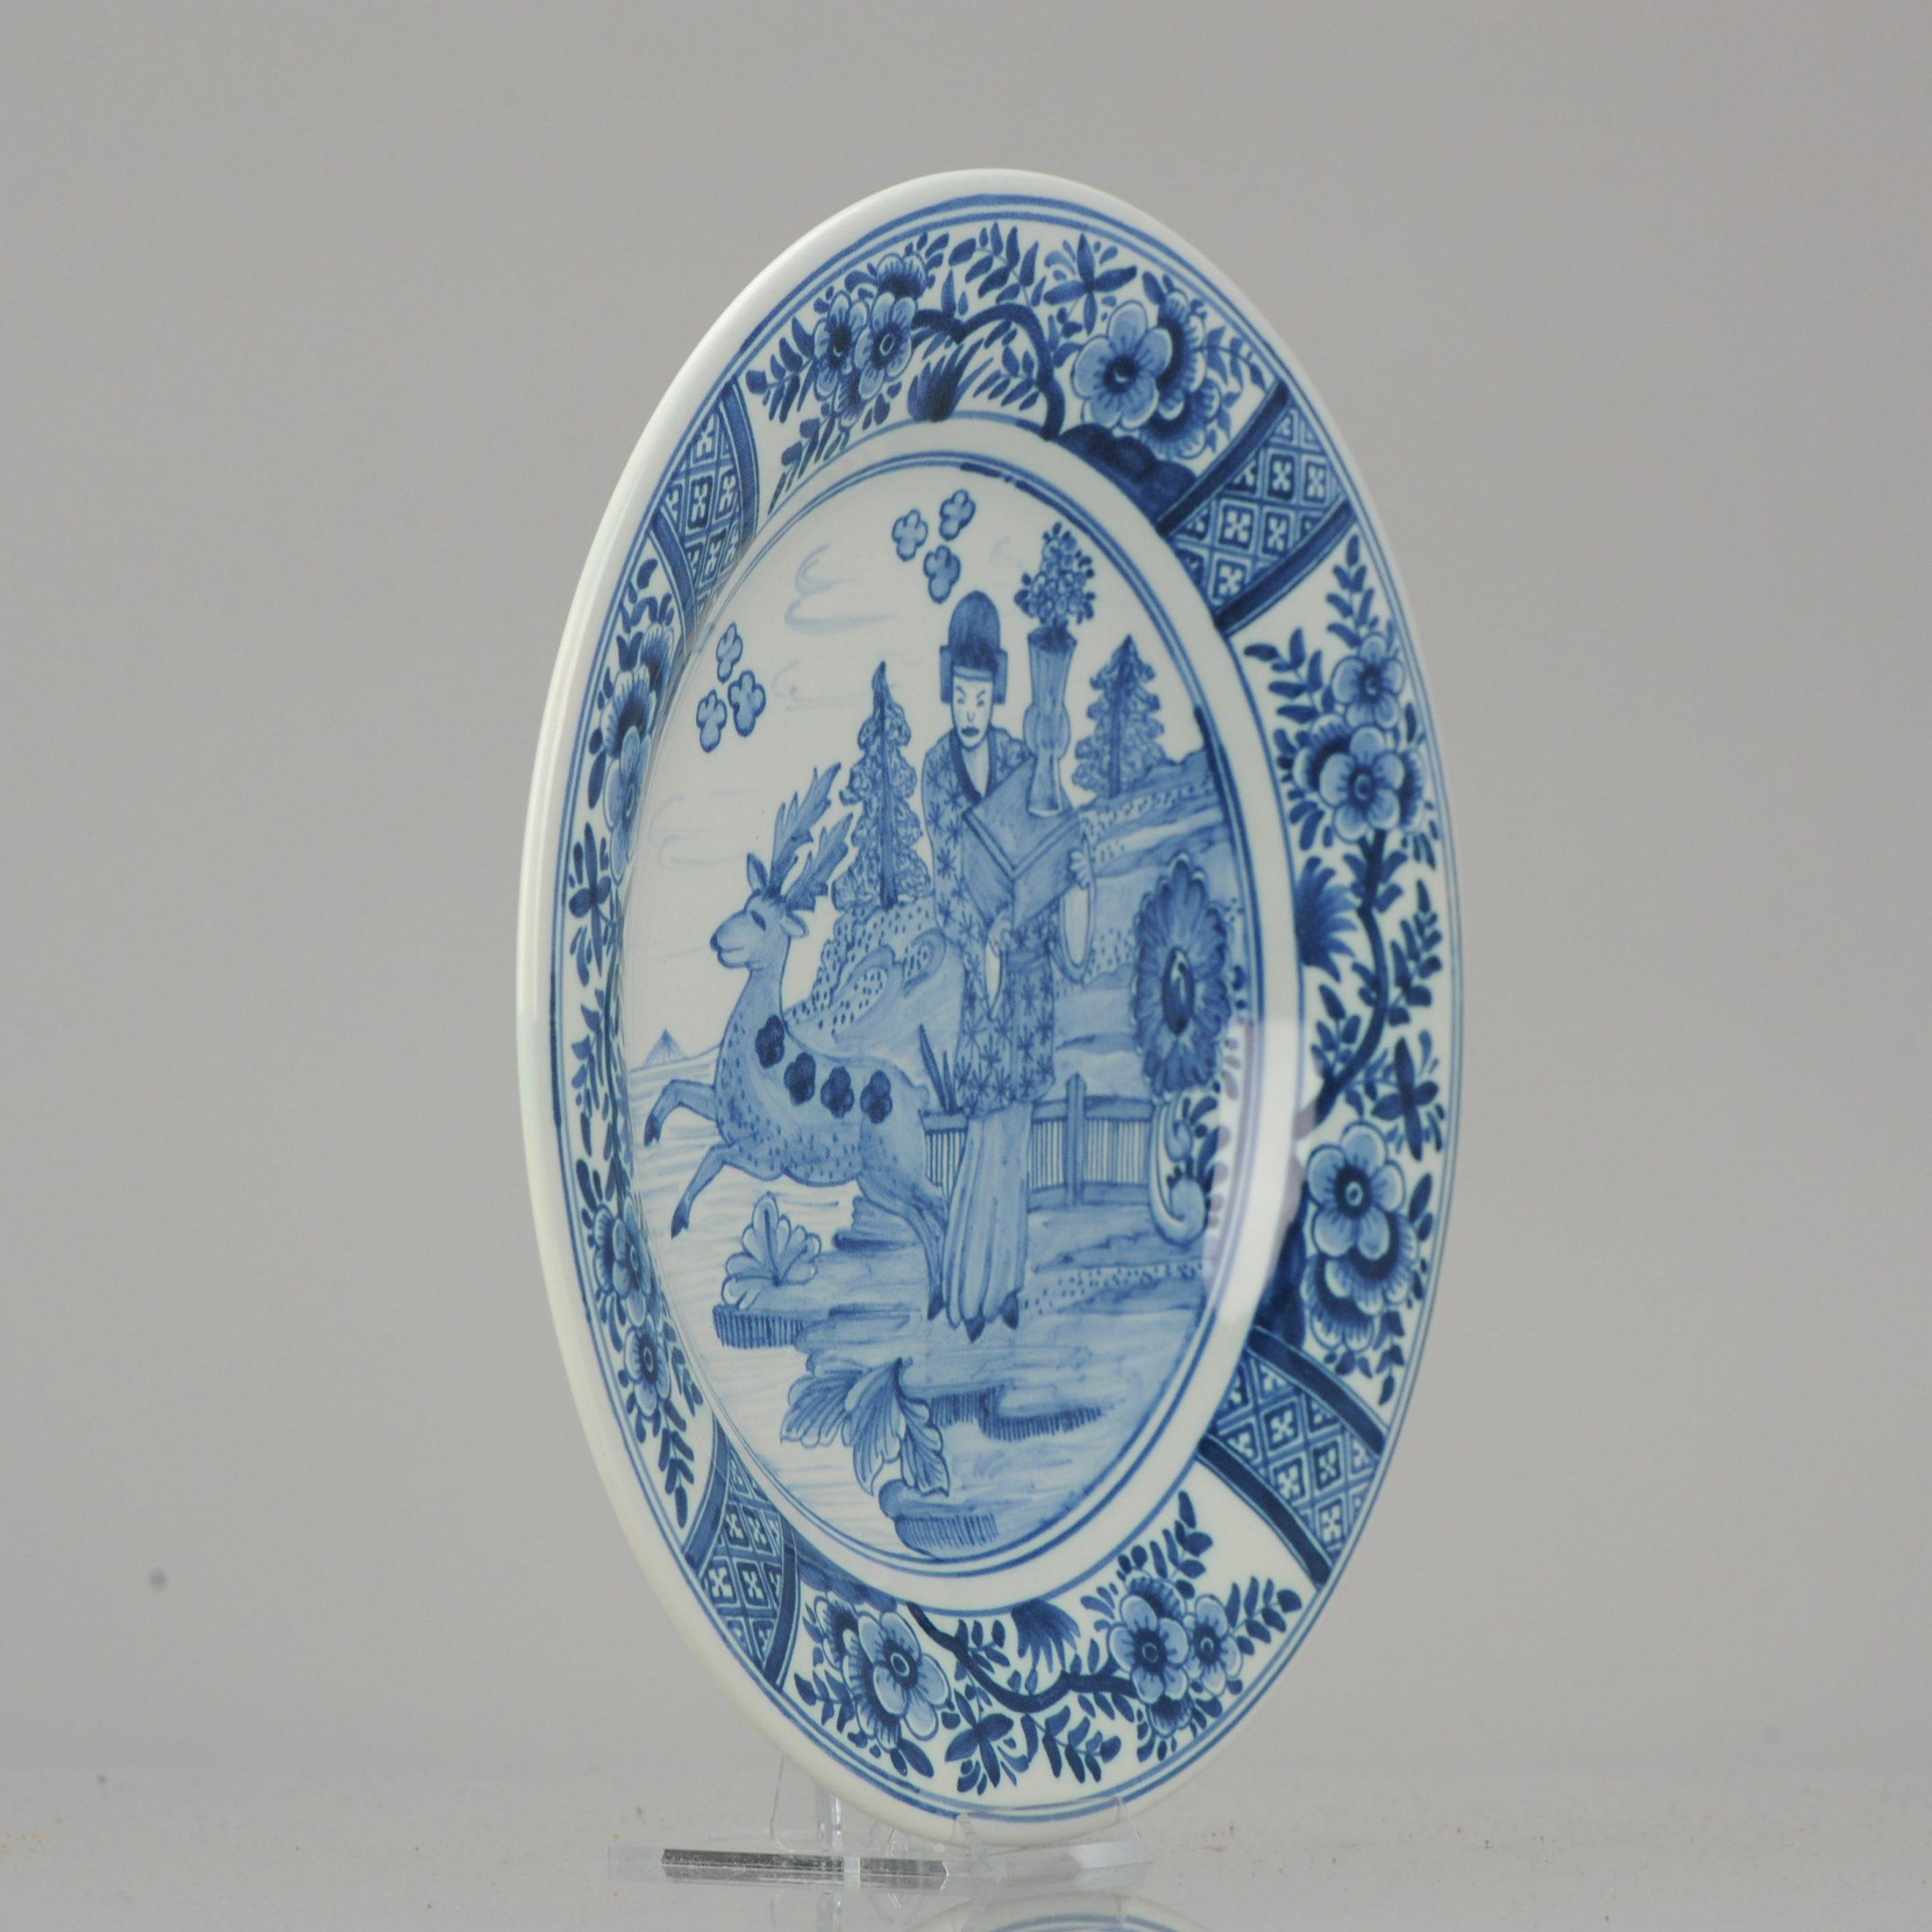 Lovely Dutch Delftware plate. 20th century. A traditional Chinese scene. Dutch Delftware was based on Chinese porcelain and many scene's were losely copied from scenes on Chinese porcelain. This is a great example.

Additional information:
Material: